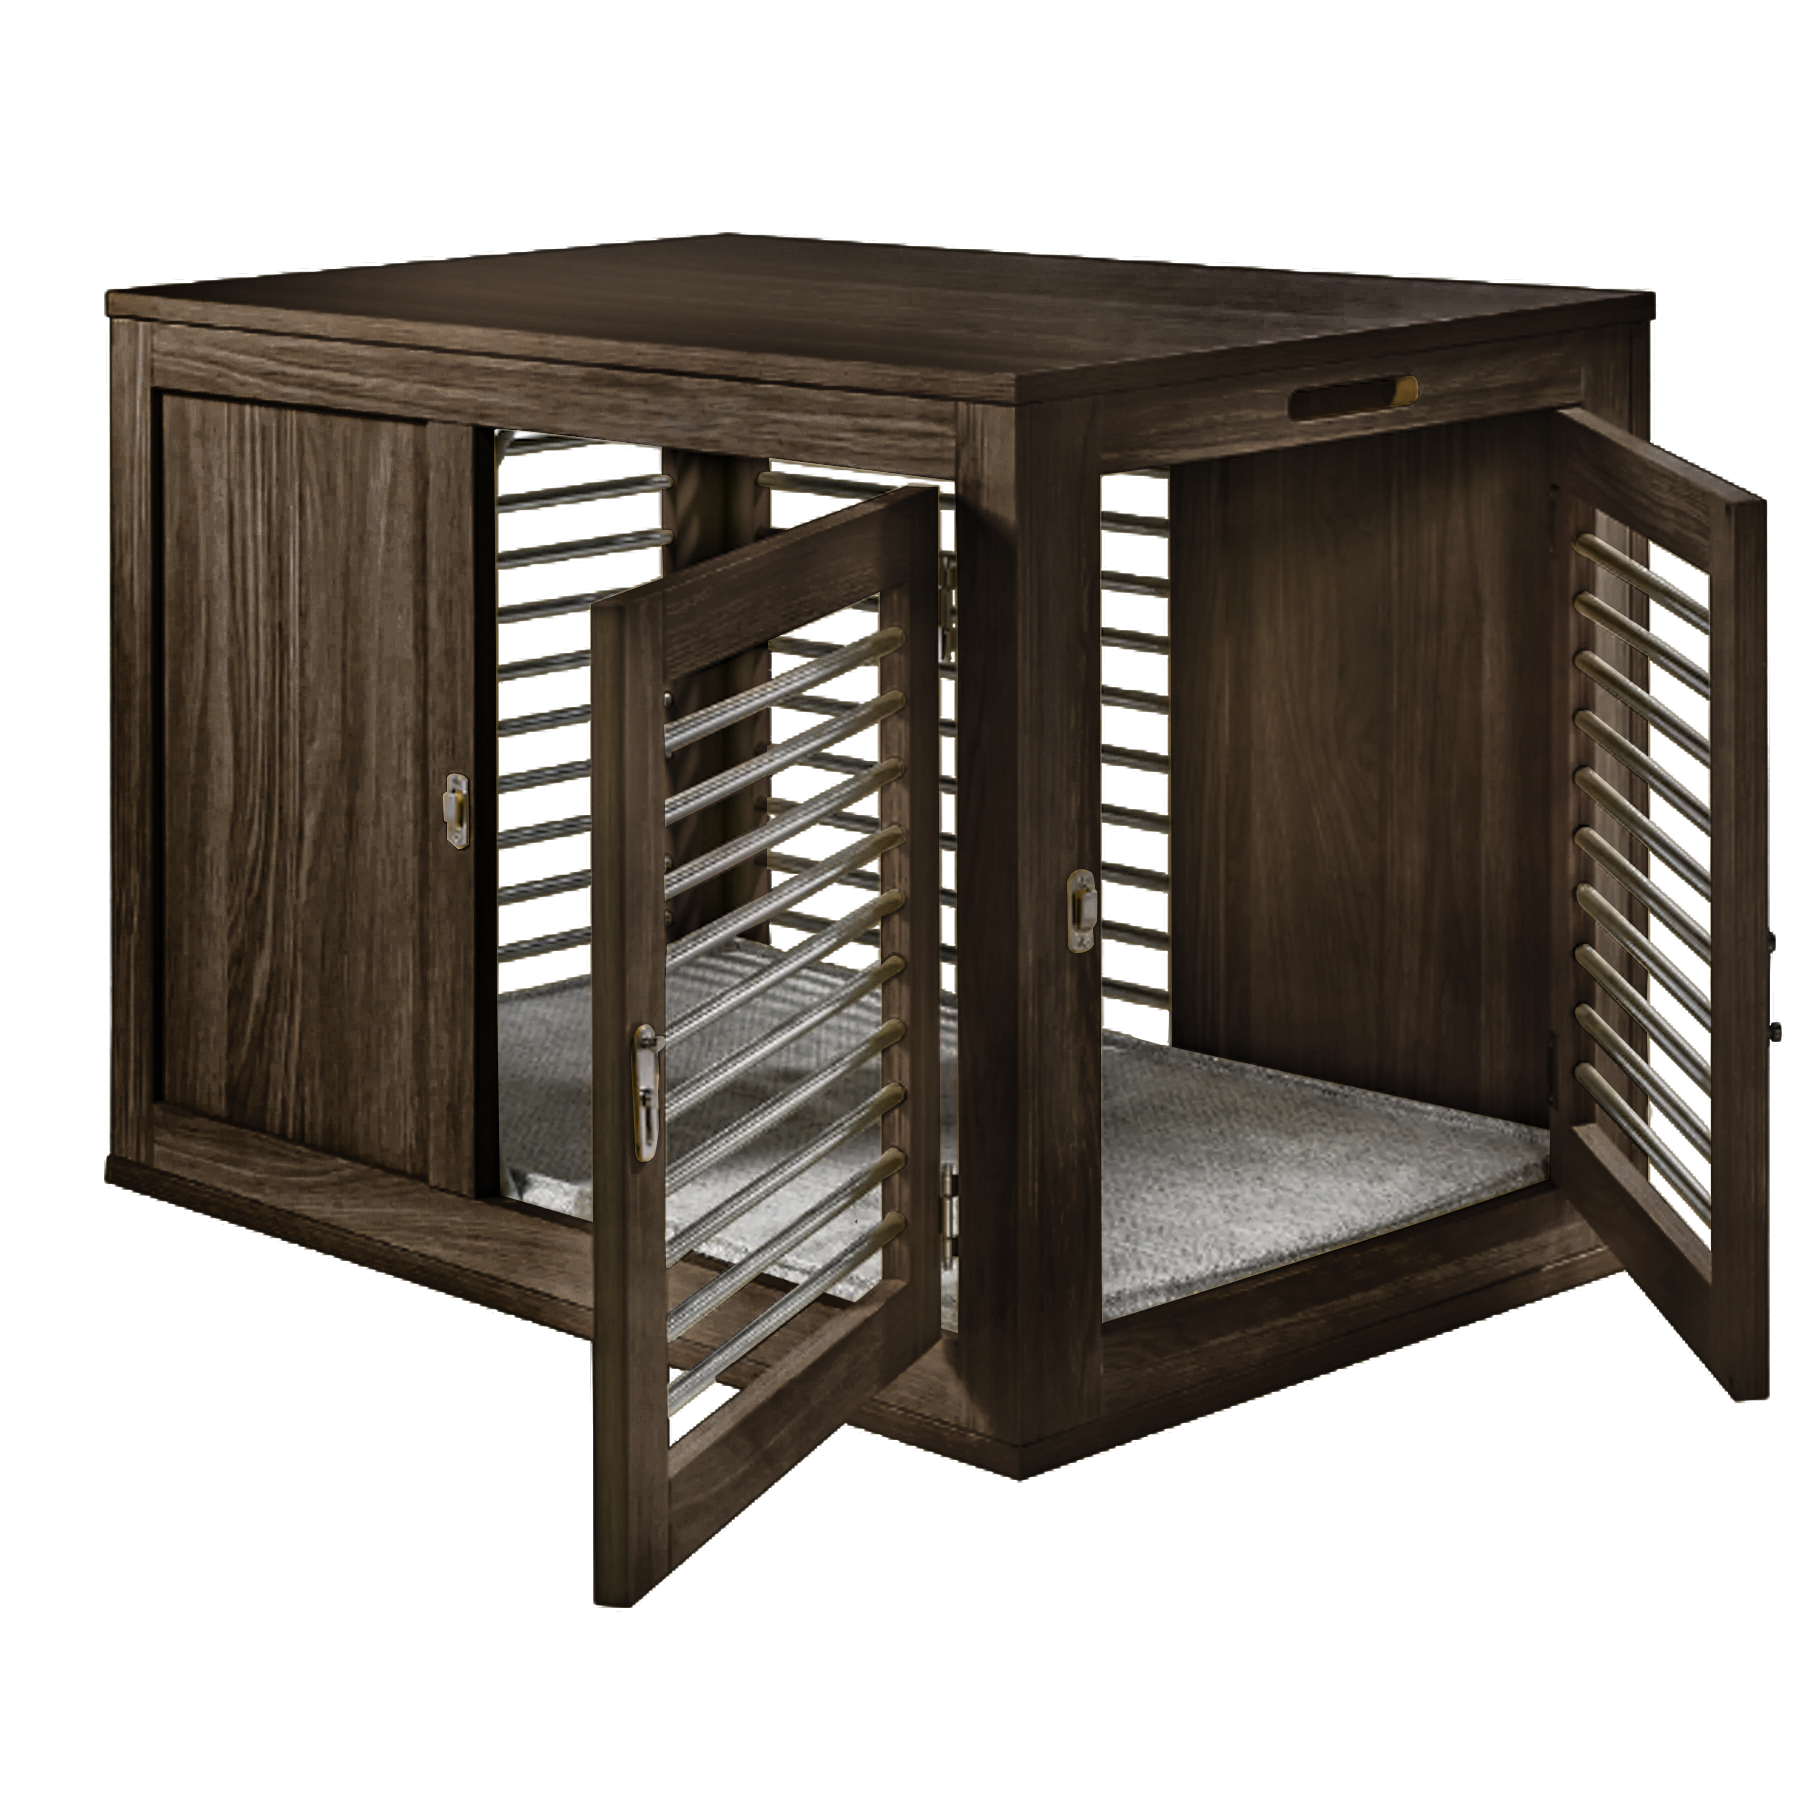 ganache-mid-hickory-brown-moderno-crate-dog-kennel